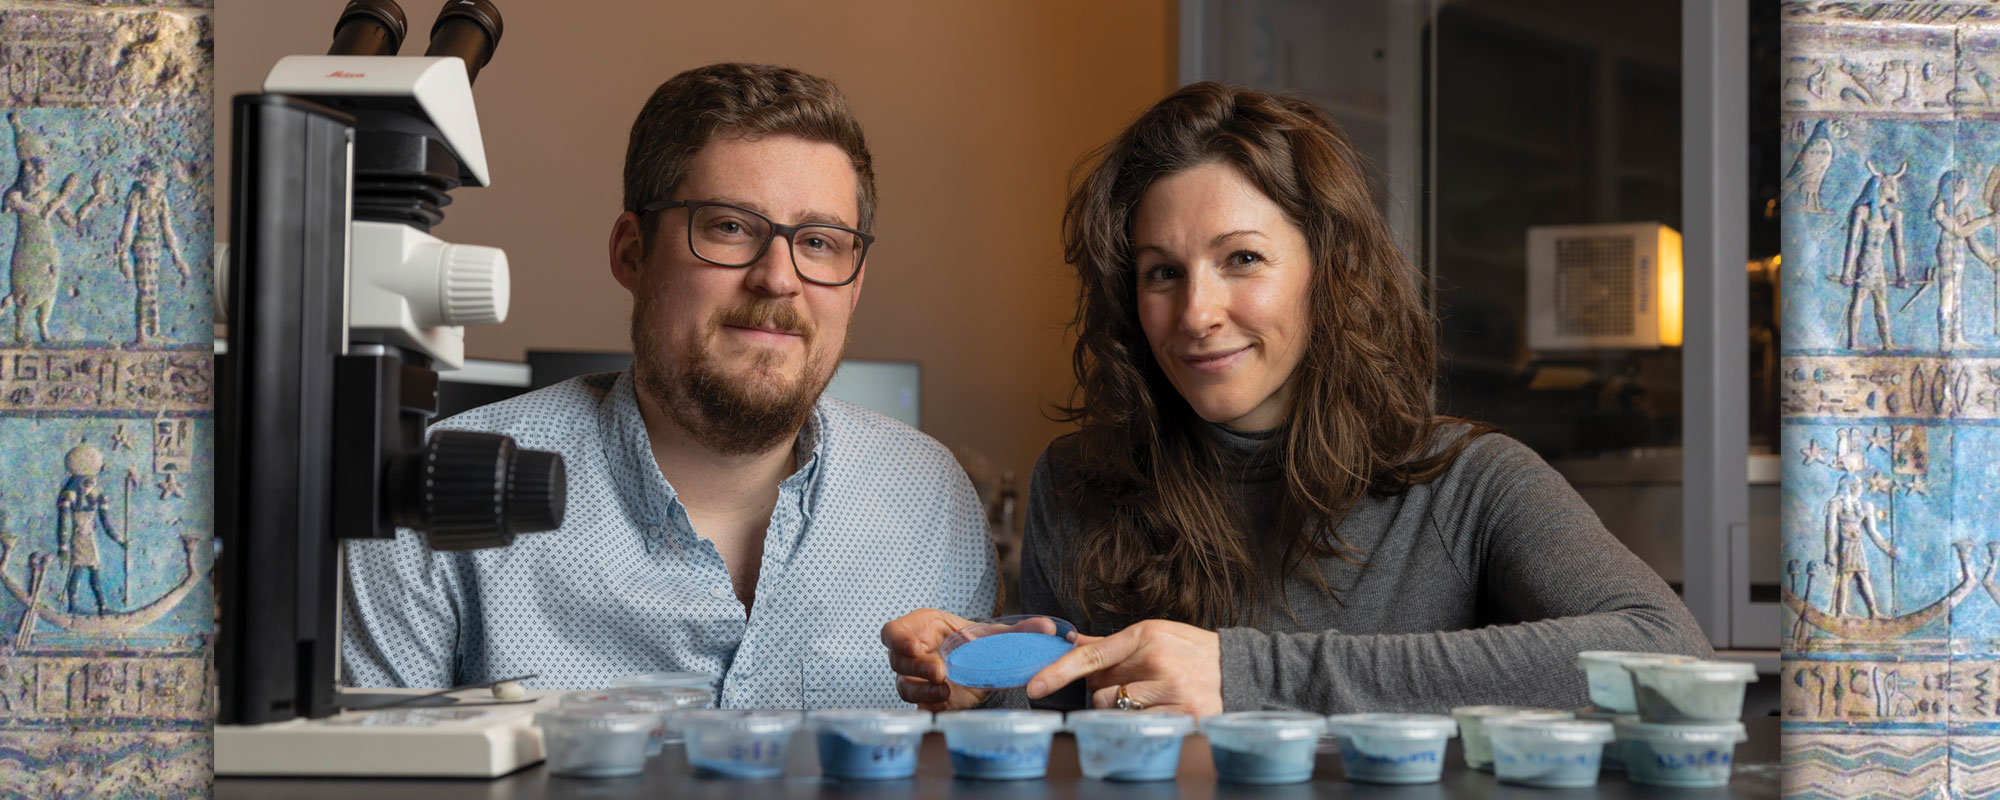 Two scientists posing with a blue powder in a petri dish